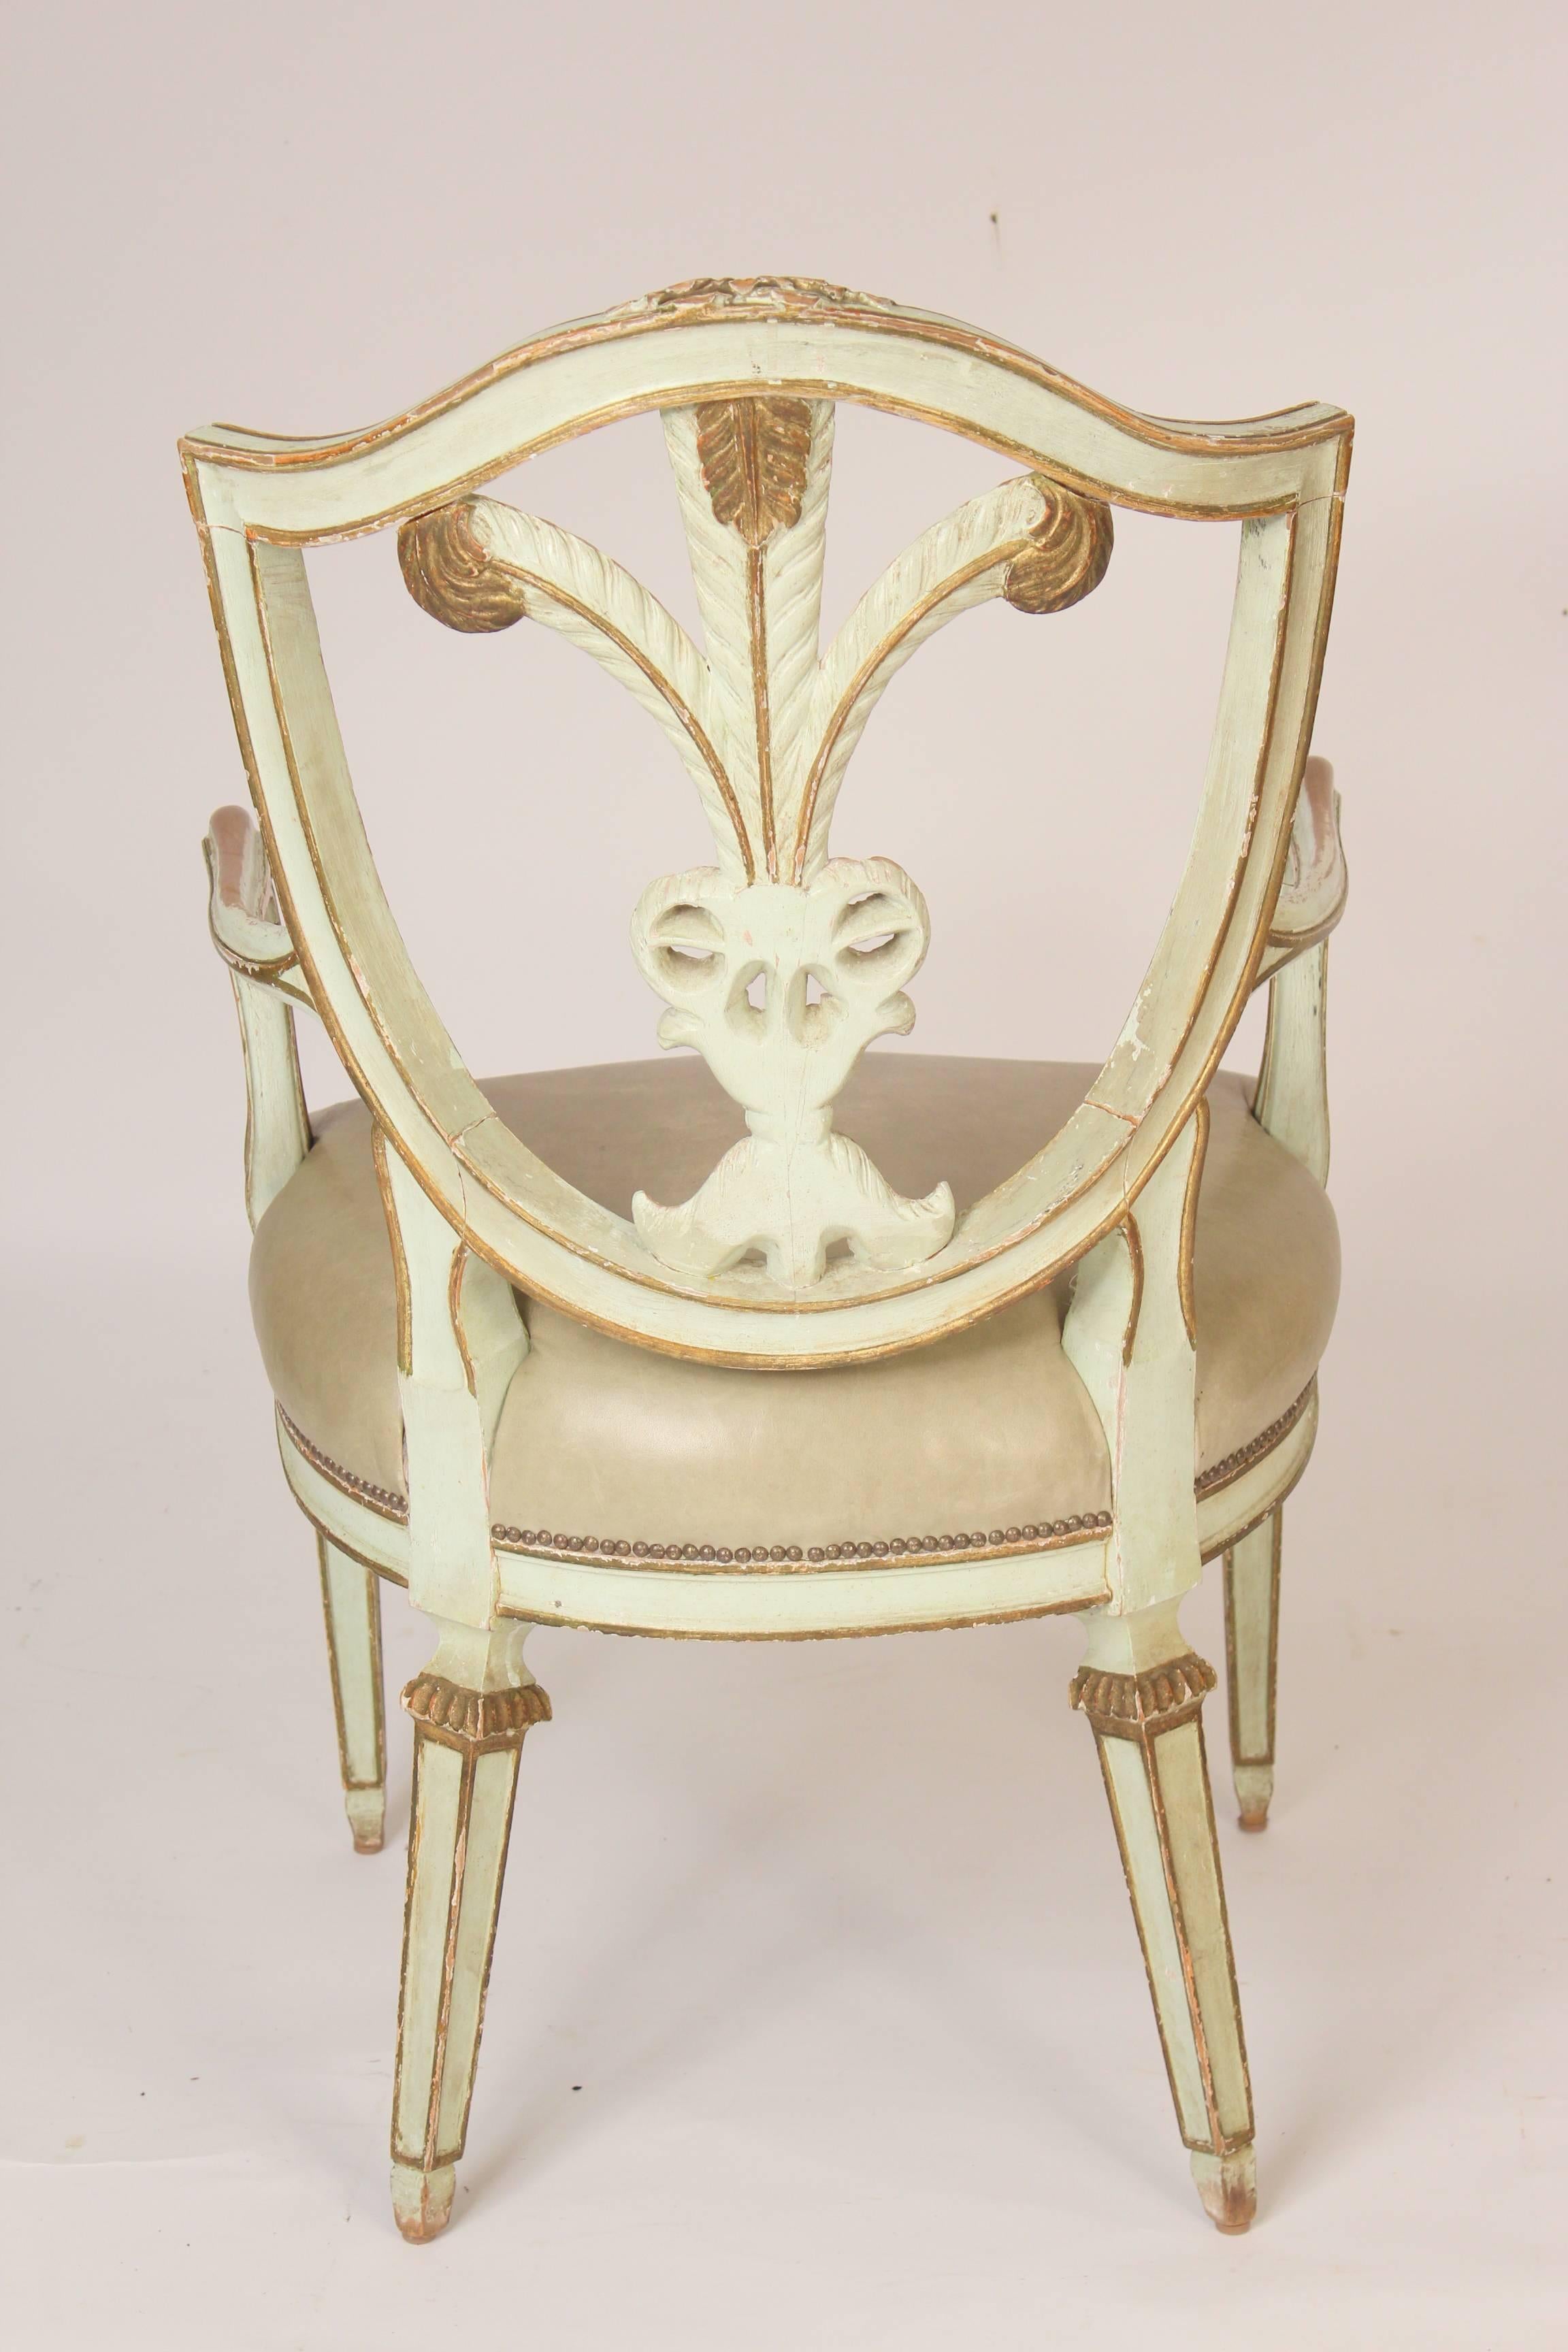 European Neoclassical Style Painted and Gilt Armchair